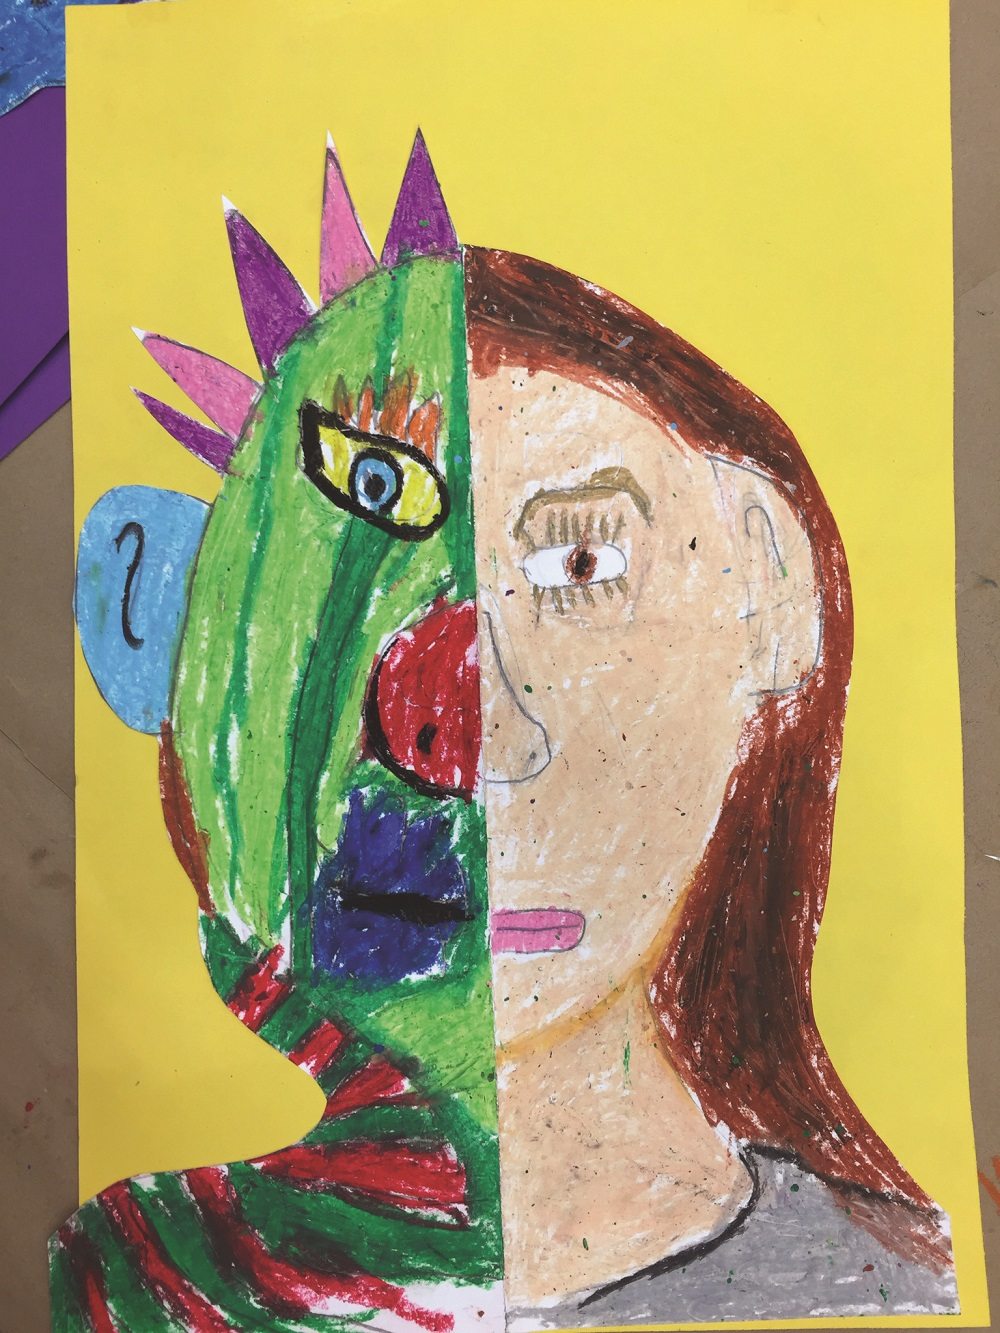 Picasso Self-Portrait (from Kids at Art)